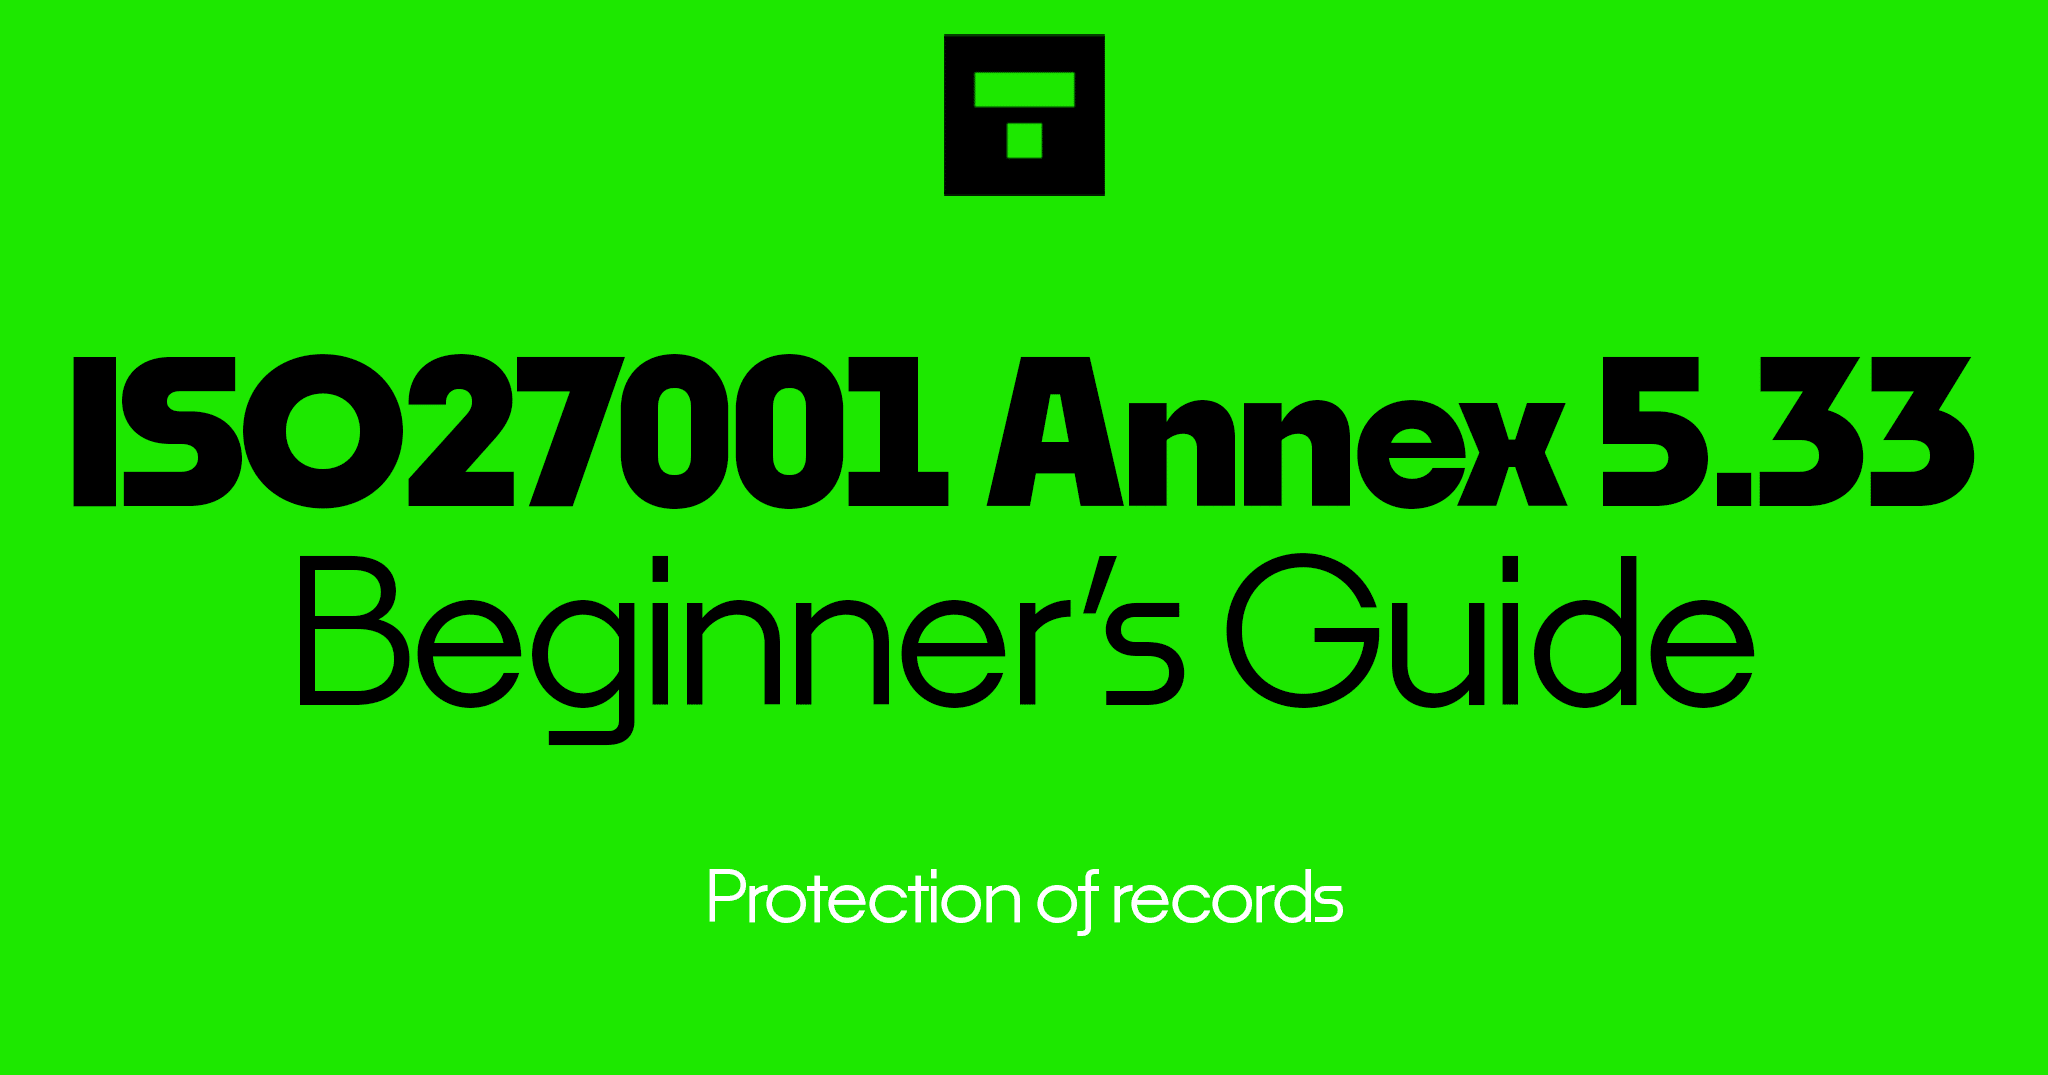 ISO 27001 Annex A 5.33 Protection of records Beginner's Guide